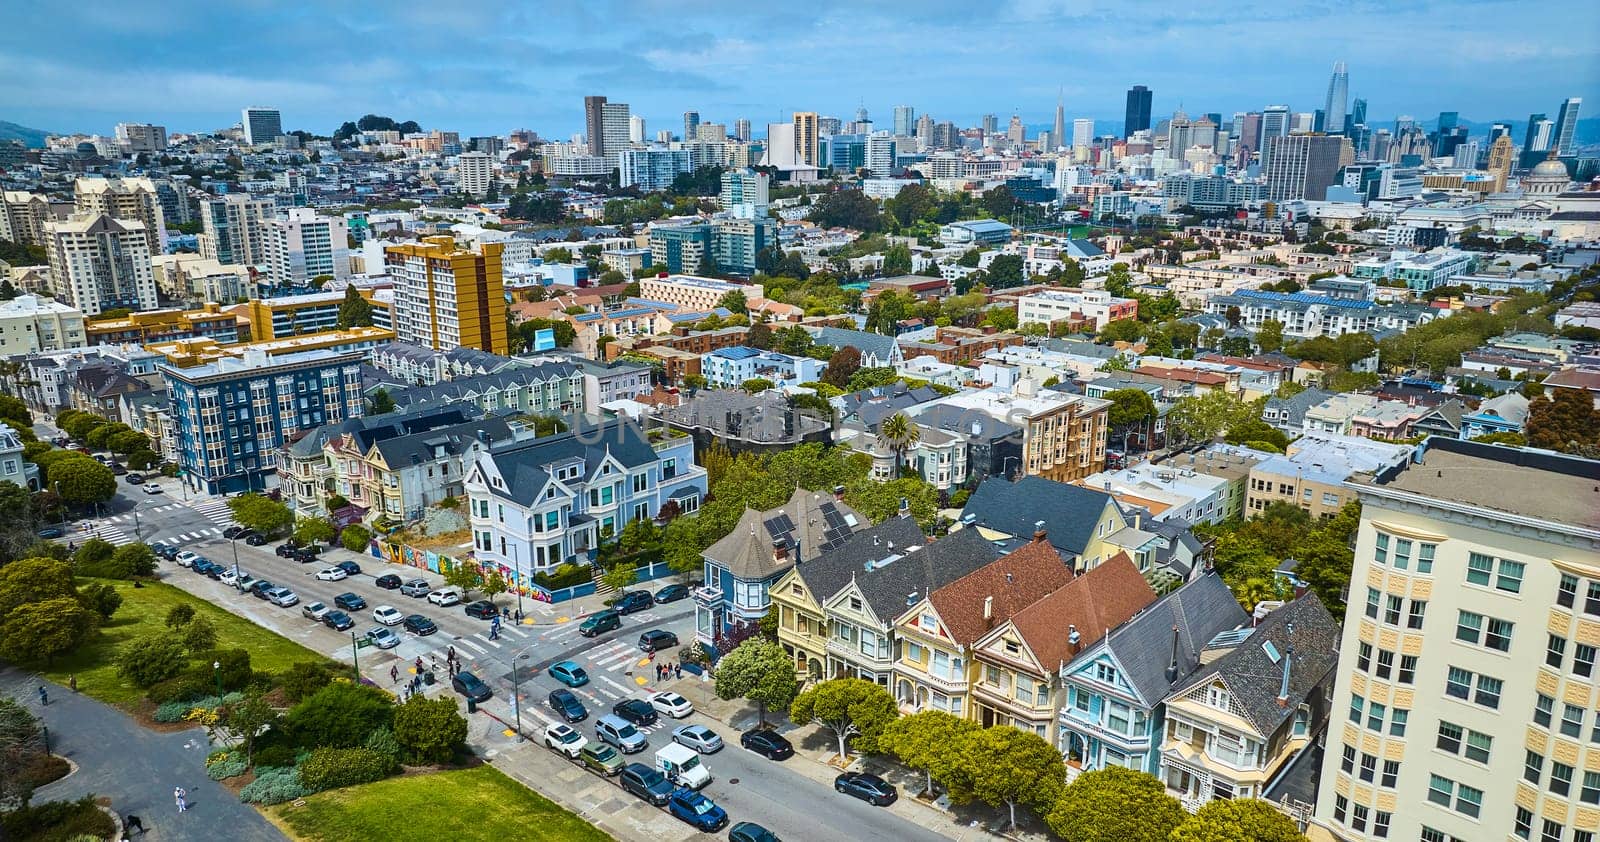 Image of Aerial The Painted Ladies houses with wide view of San Francisco